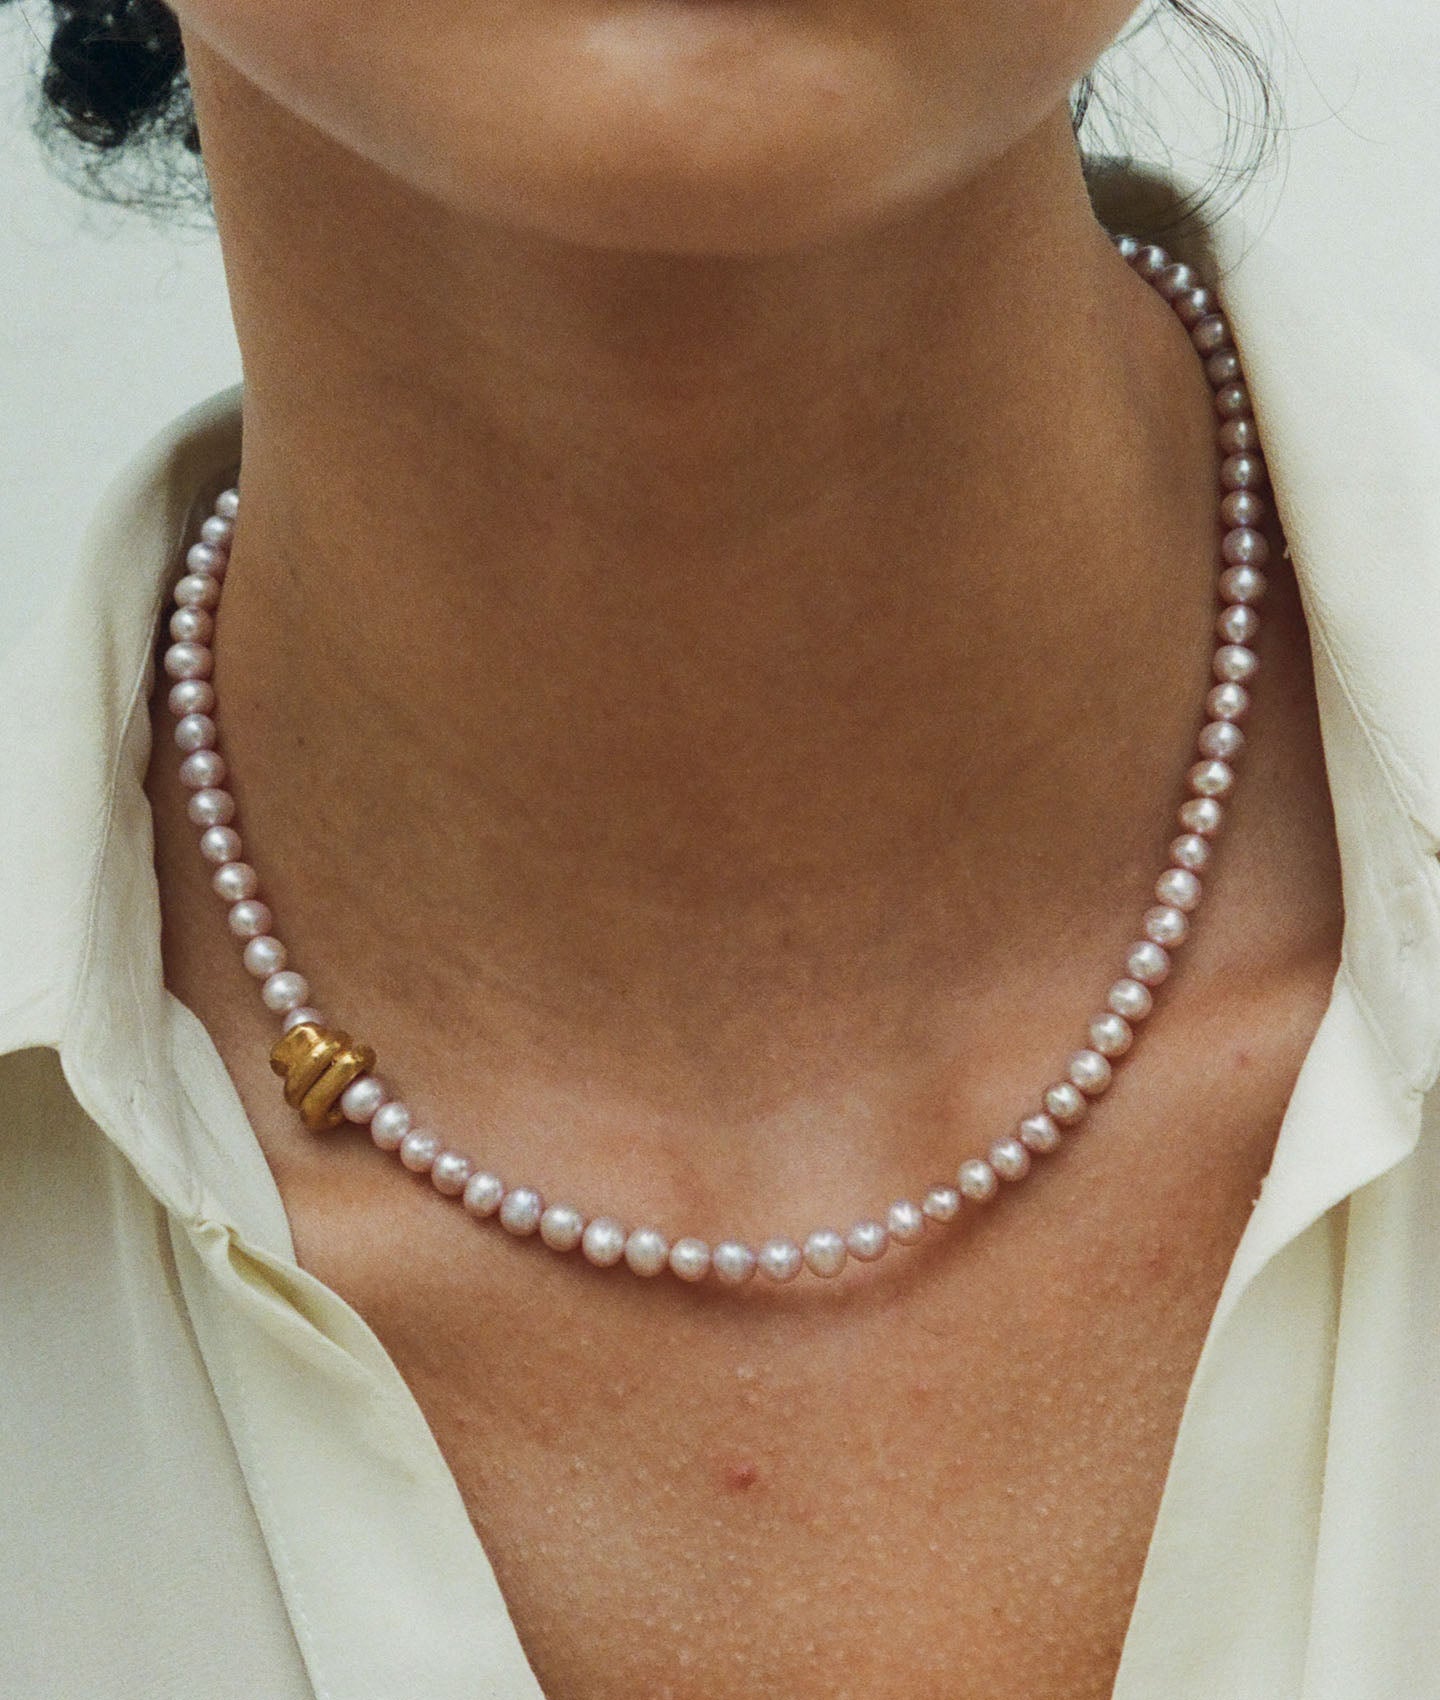 The Celestial Raindrop Pink Pearl Necklace